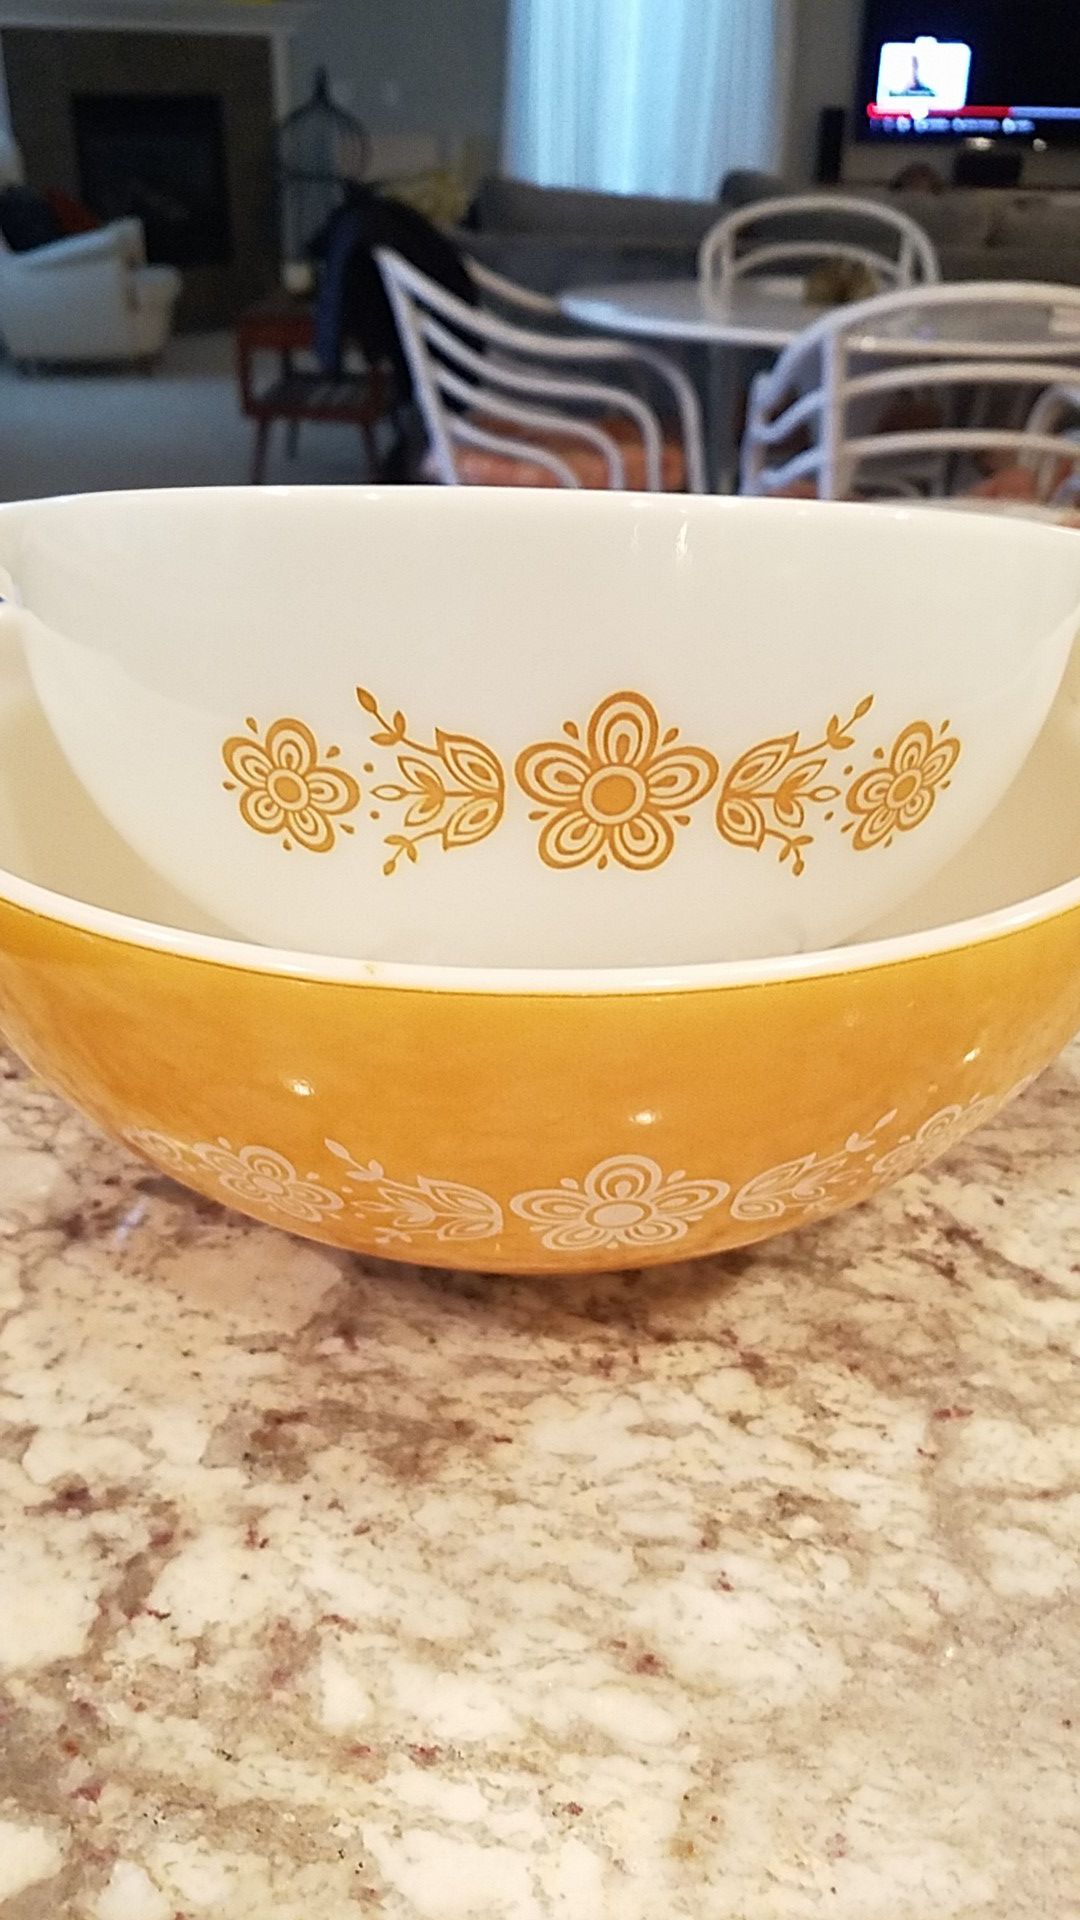 Awesome golden butterfly Pyrex nesting bowls